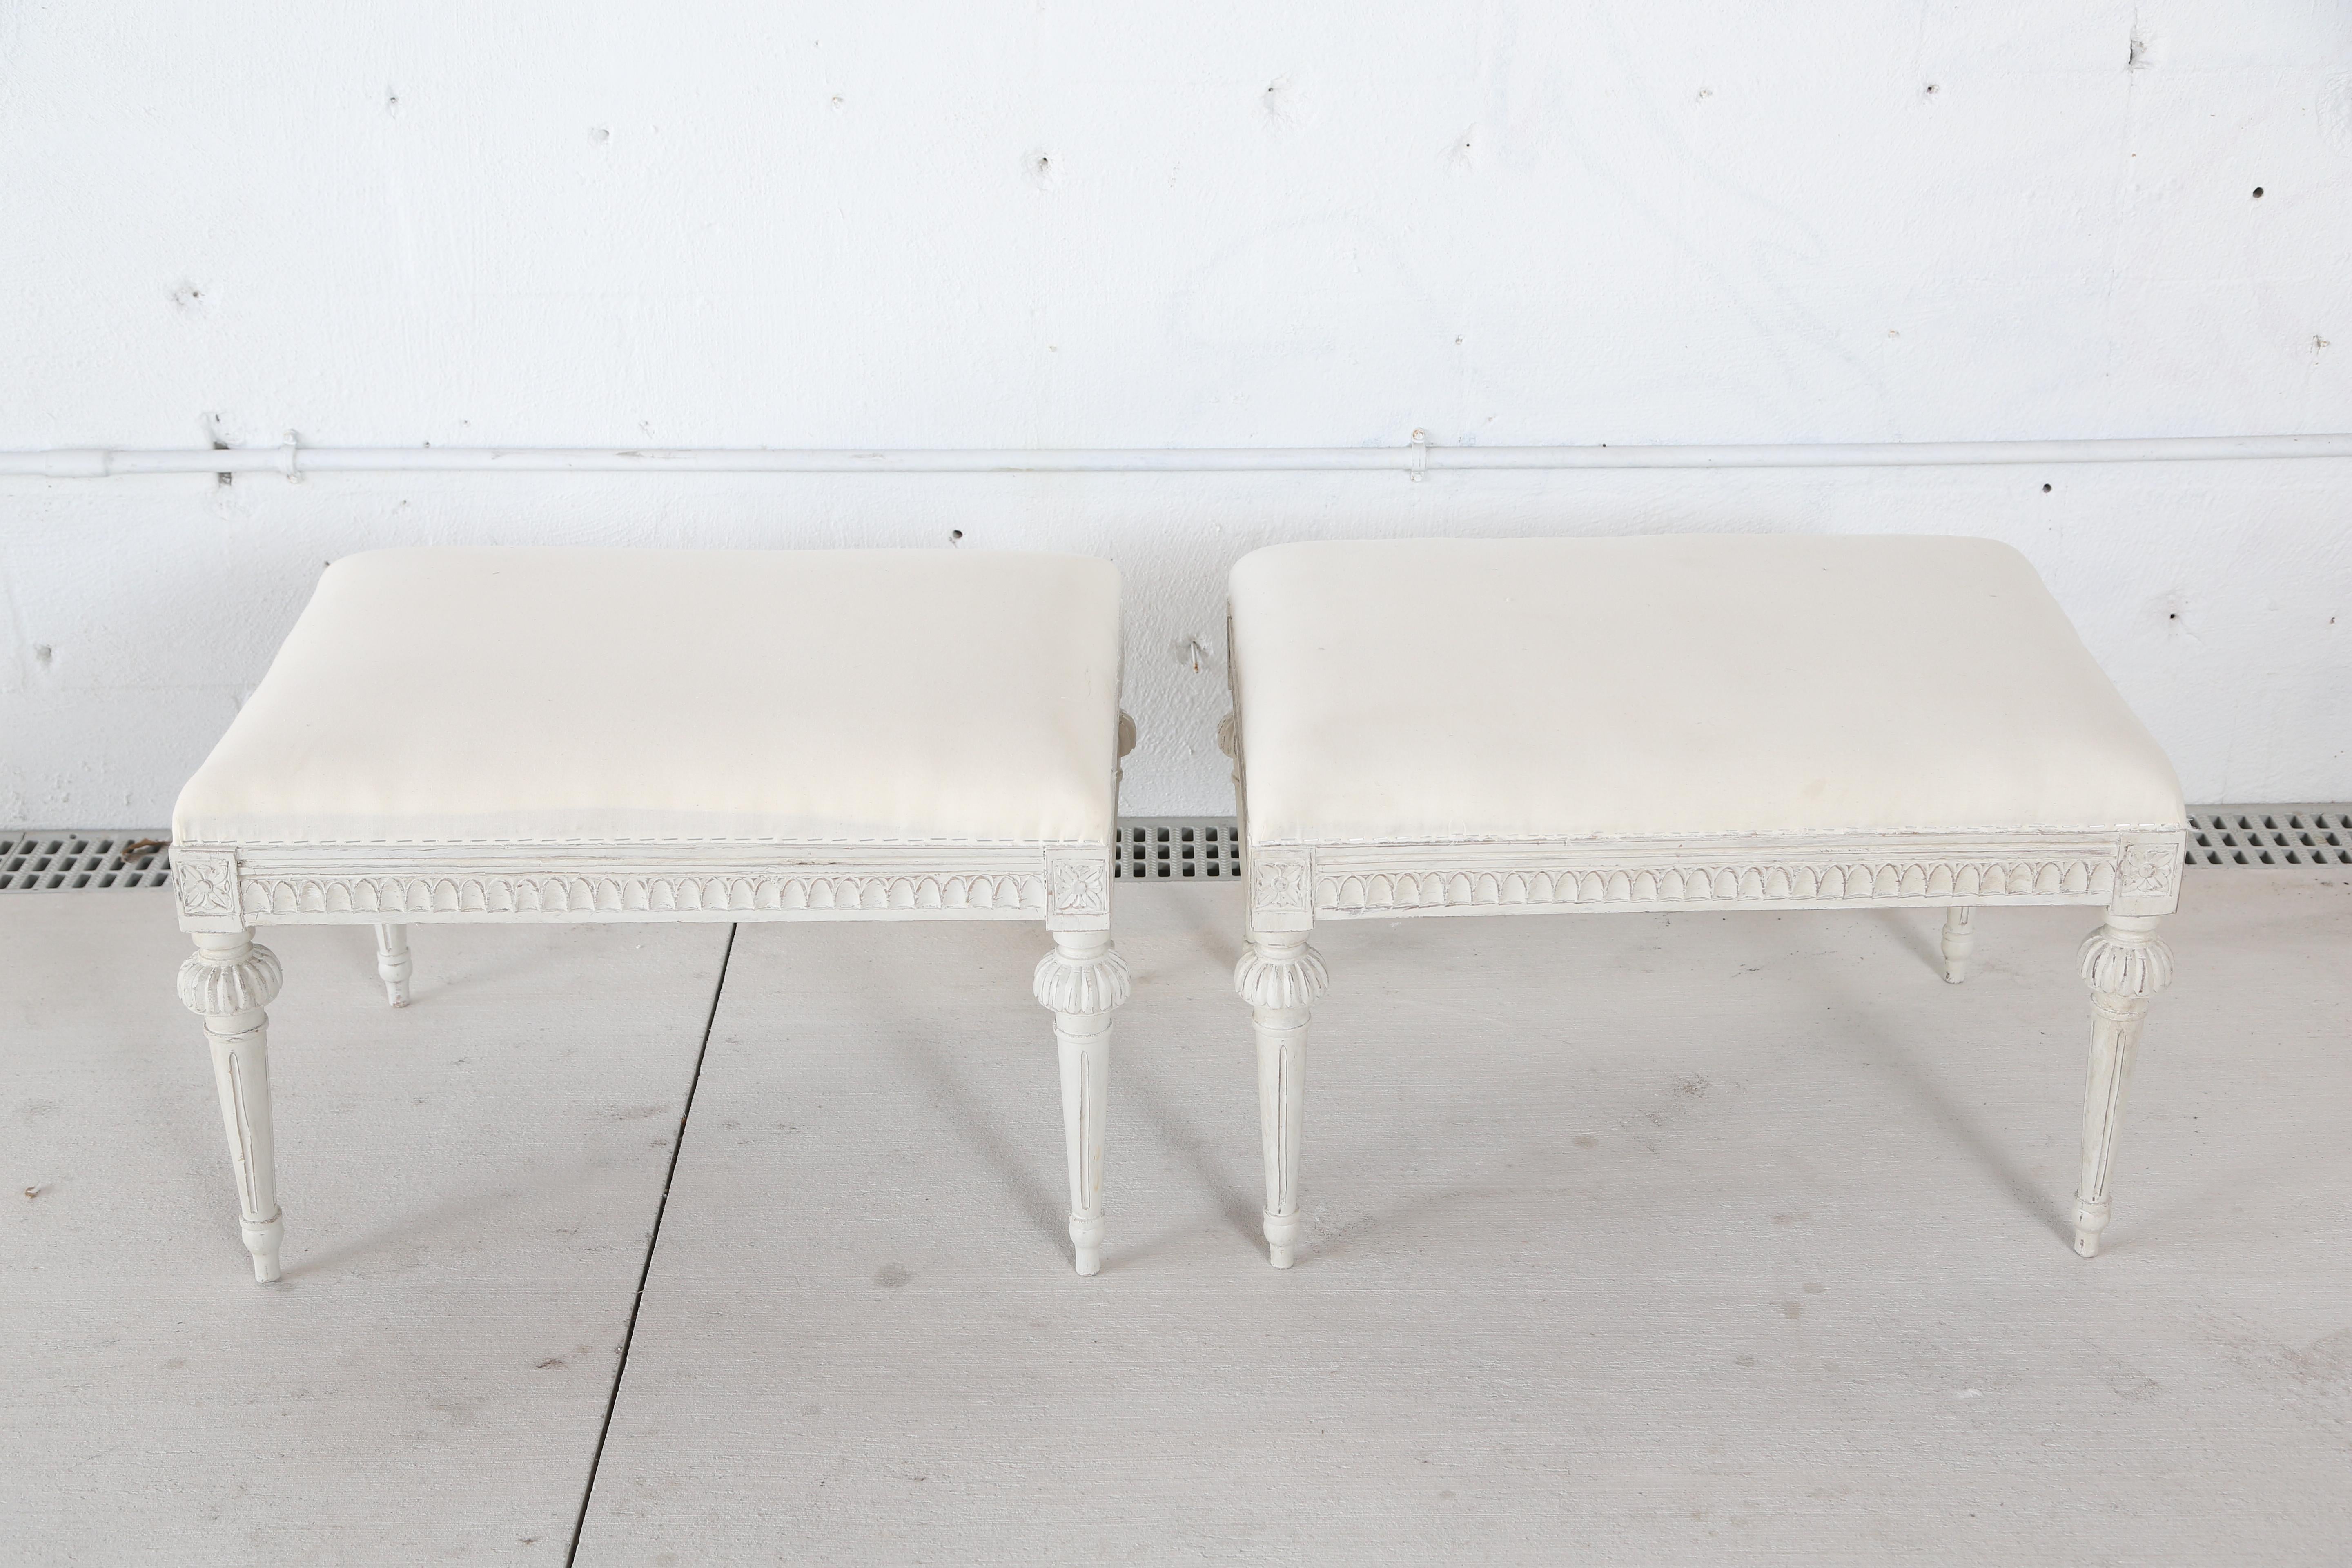 One  antique Swedish Gustavian style stool, with tapered fluted and carved legs. Seat apron edge is beautifully carved with egg and dart design. Wood painted in Swedish white color. Upholstered seat top
on white muslin, circa 1900-1910.

One of the